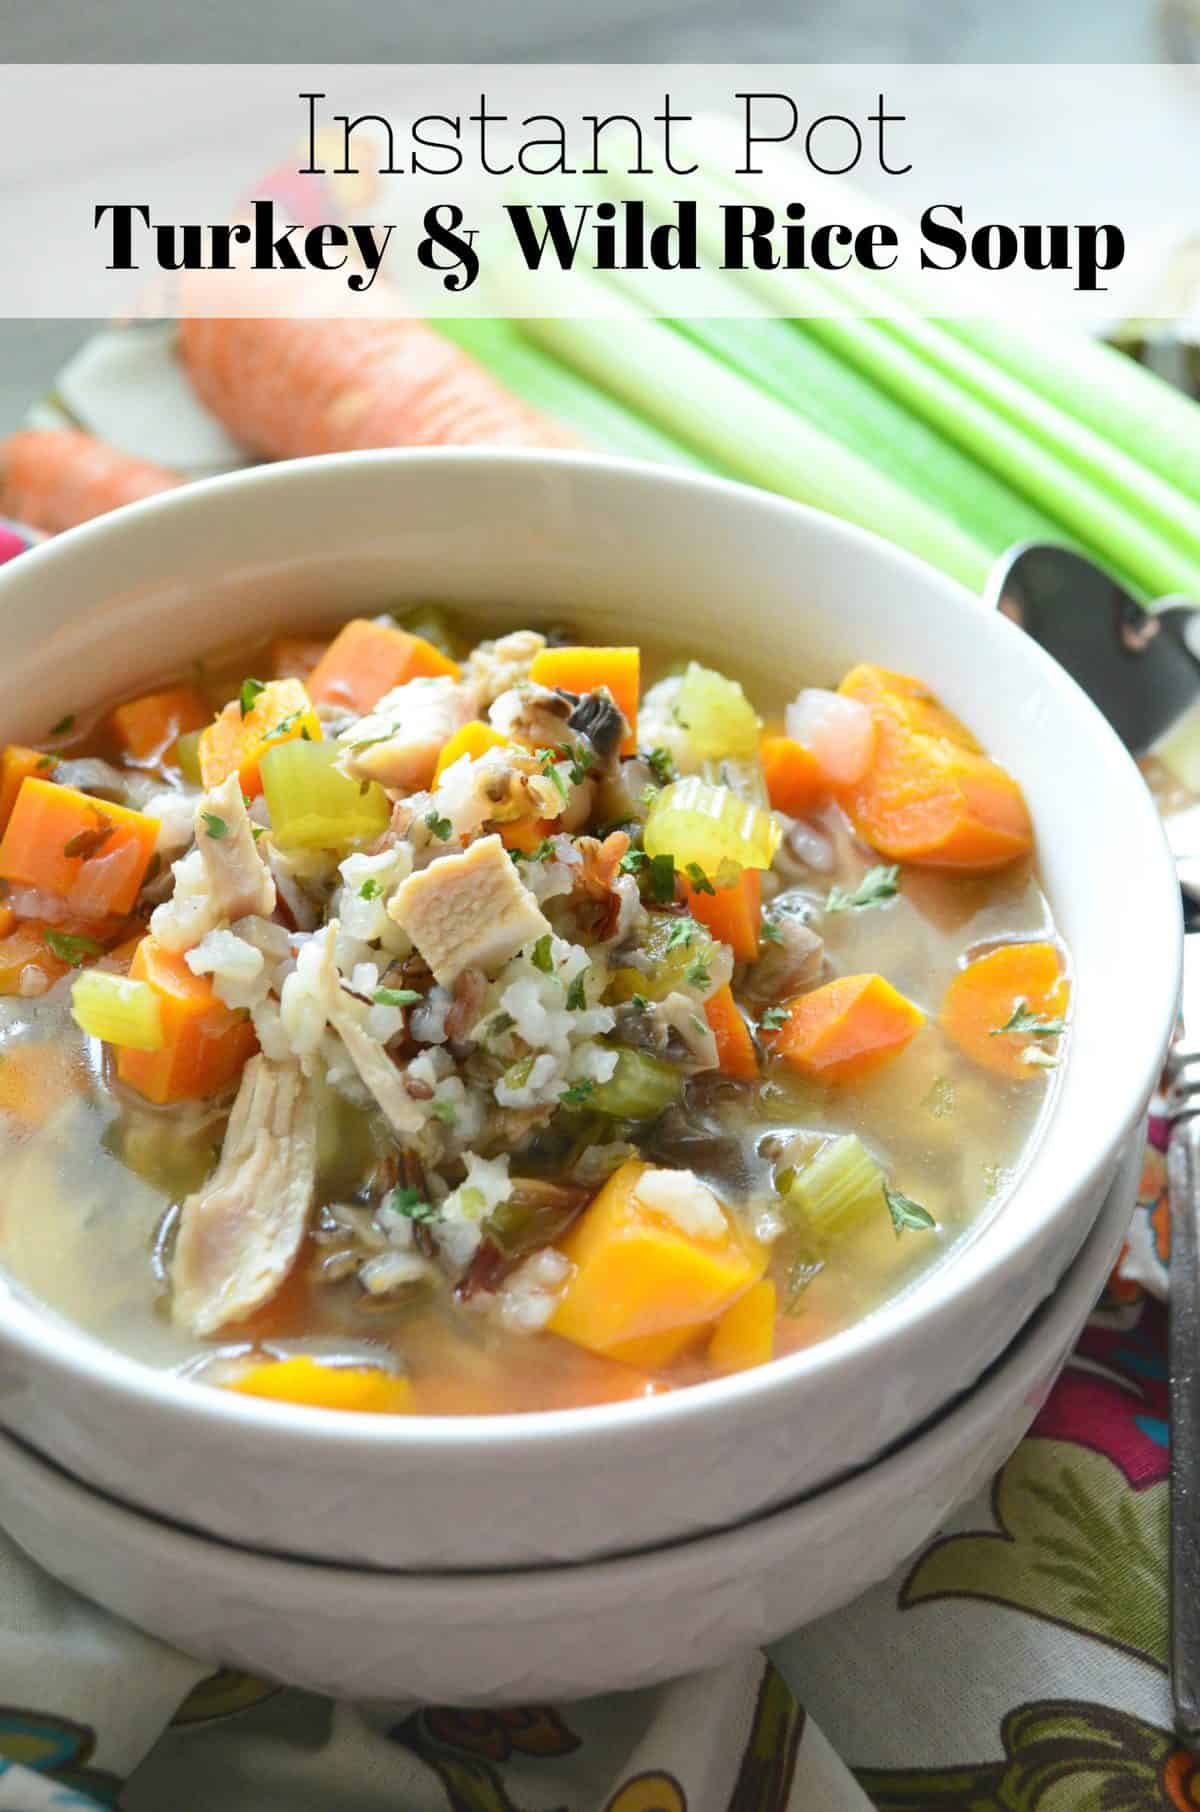 Instant Pot Turkey & Wild Rice Soup in a white bowl with celery, carrots, rice, herbs, and turkey visible.